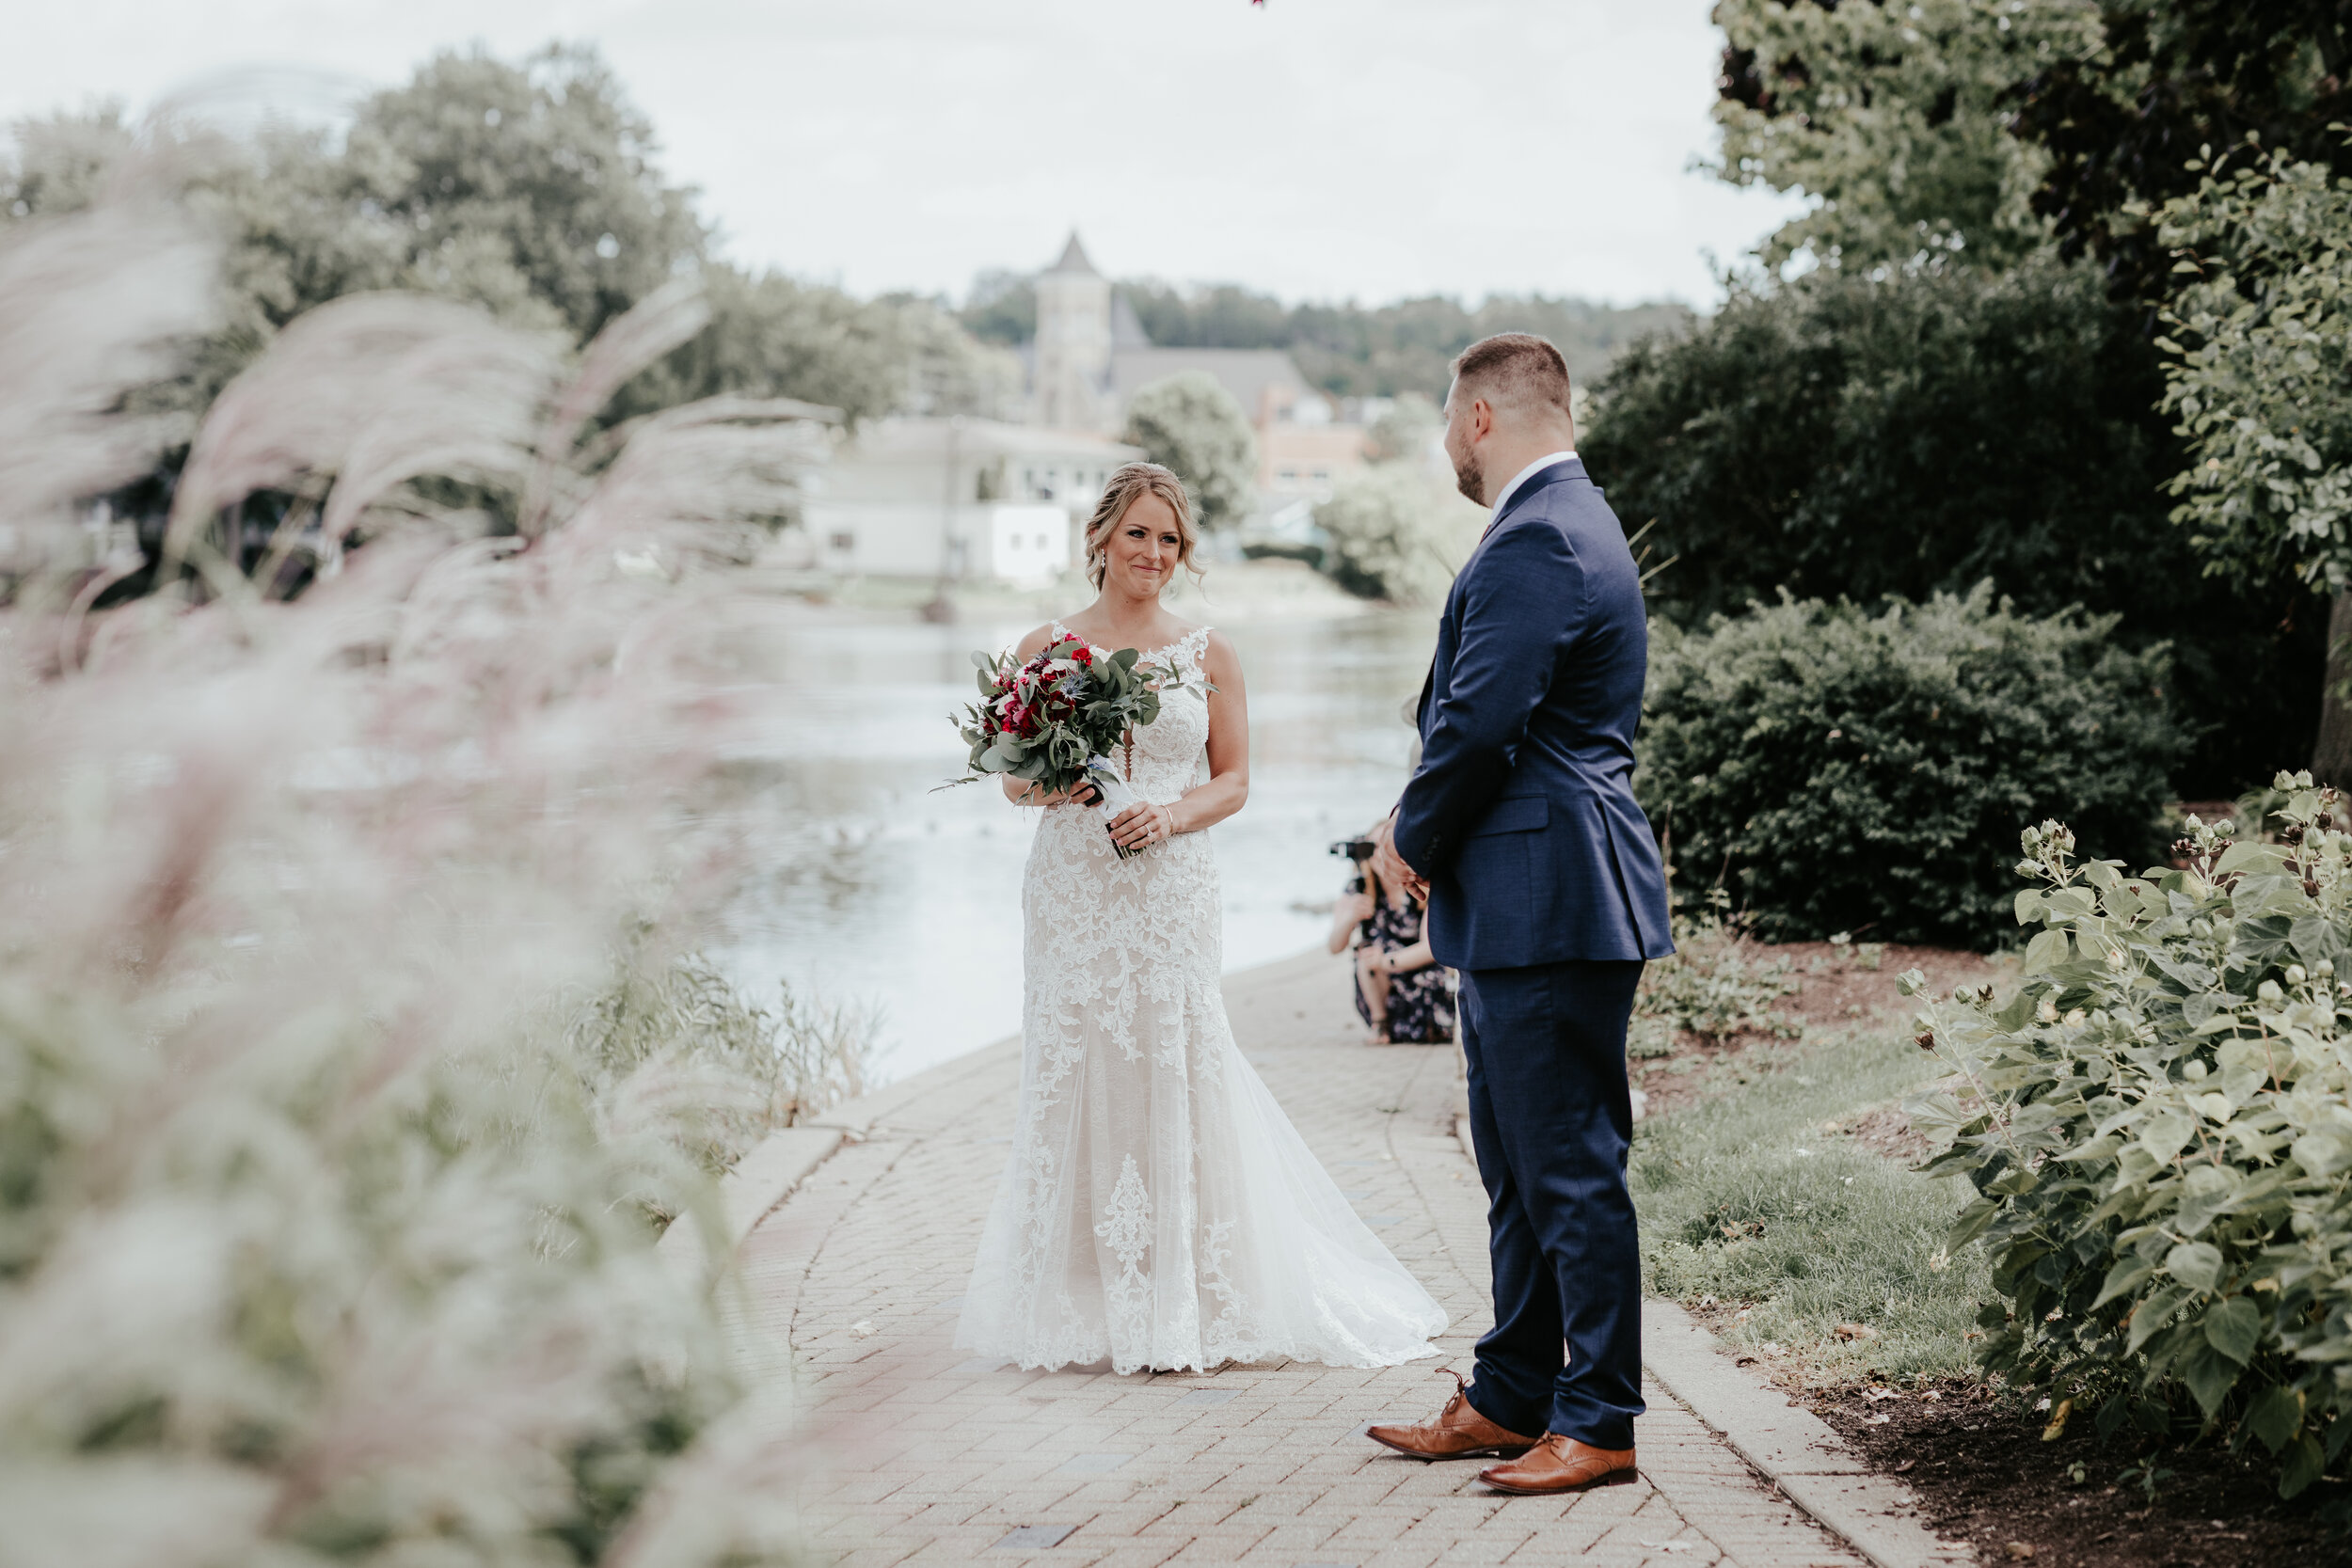 Bride and Groom first look Danielle Schury Photography Copyright 2019 (6).JPG